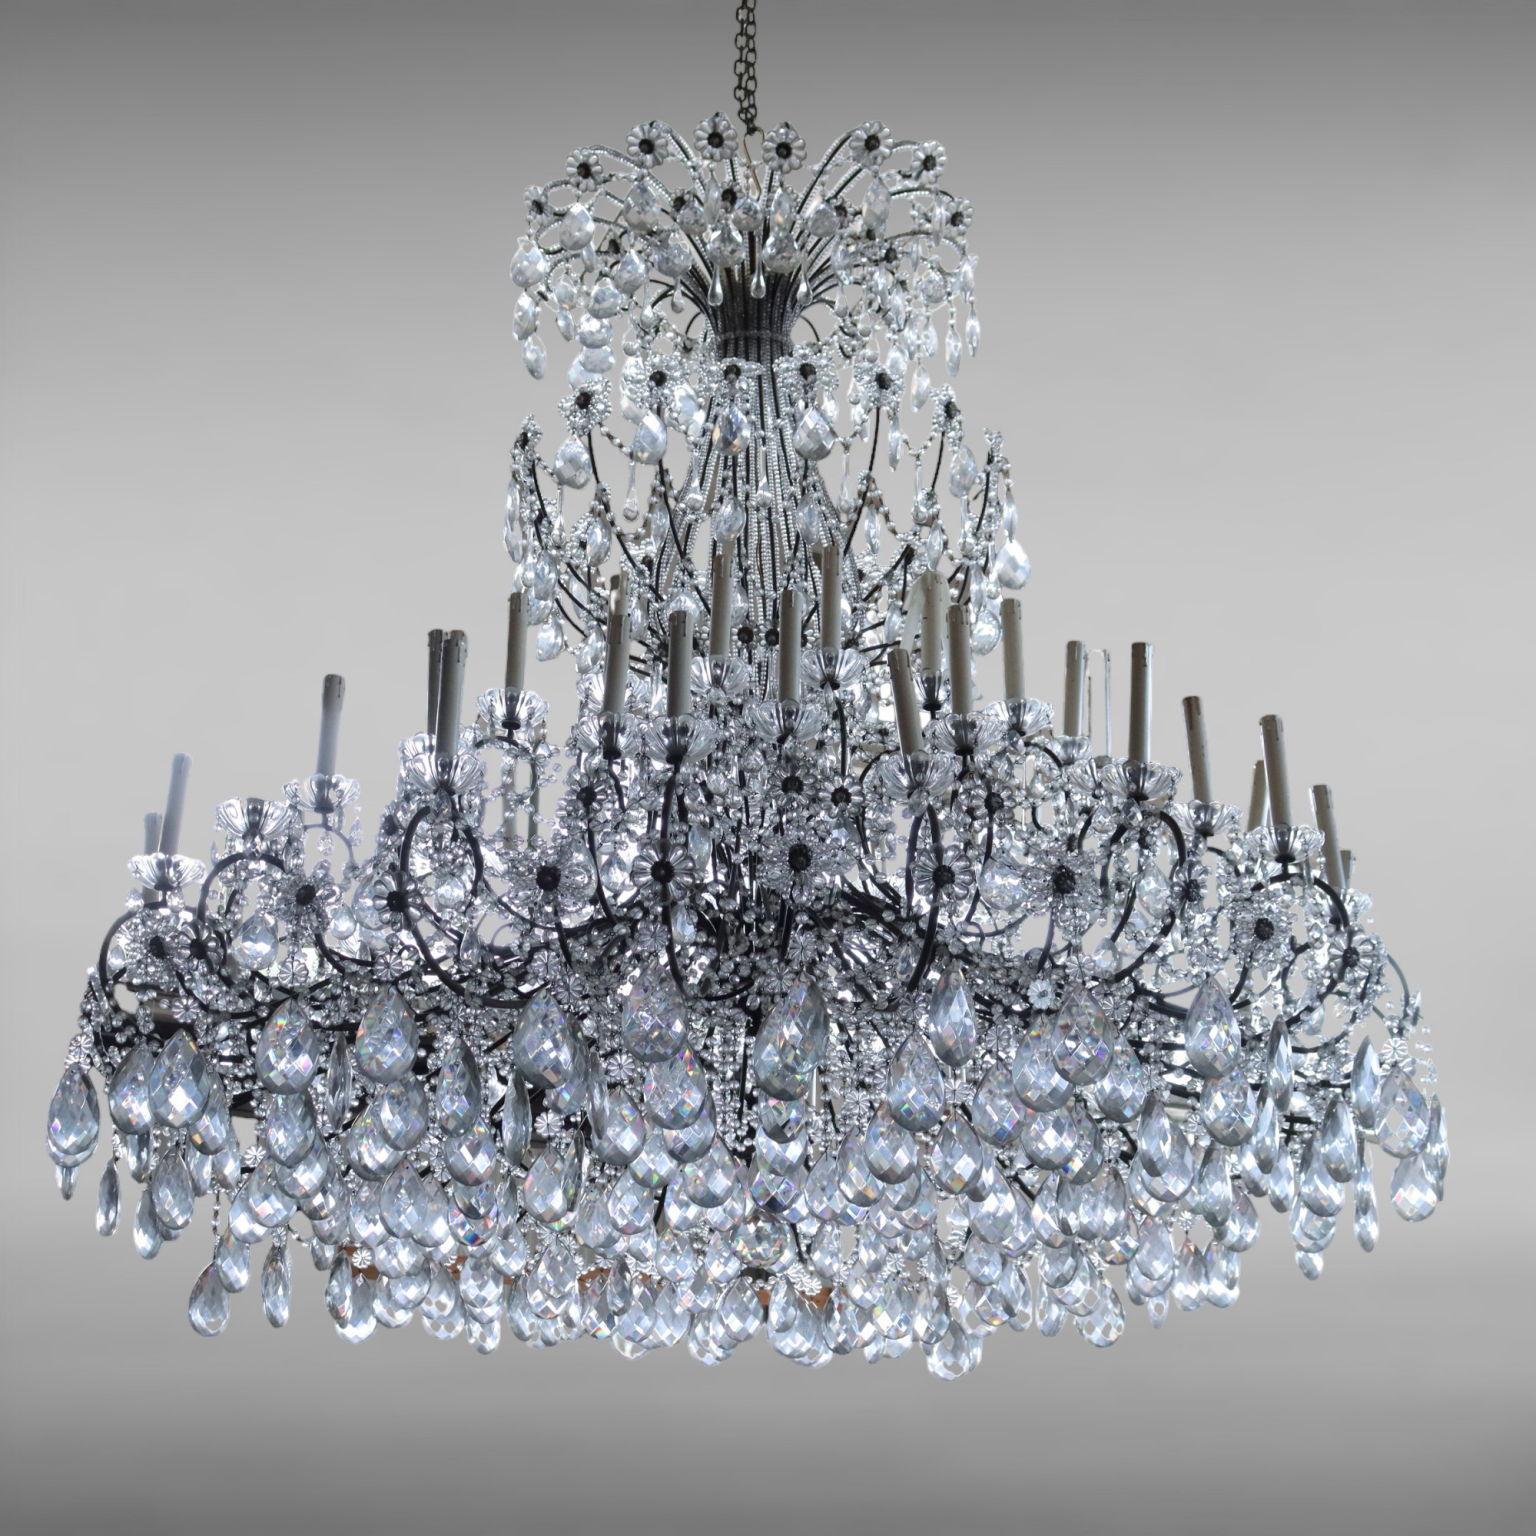 Large chandelier with metal frame, richly ornamented with crystal pendants and necklaces; features three stages each of 18 lights, with glass bobeche.
Lamp that due to age and wear may require restoration work, and probably has an electrification